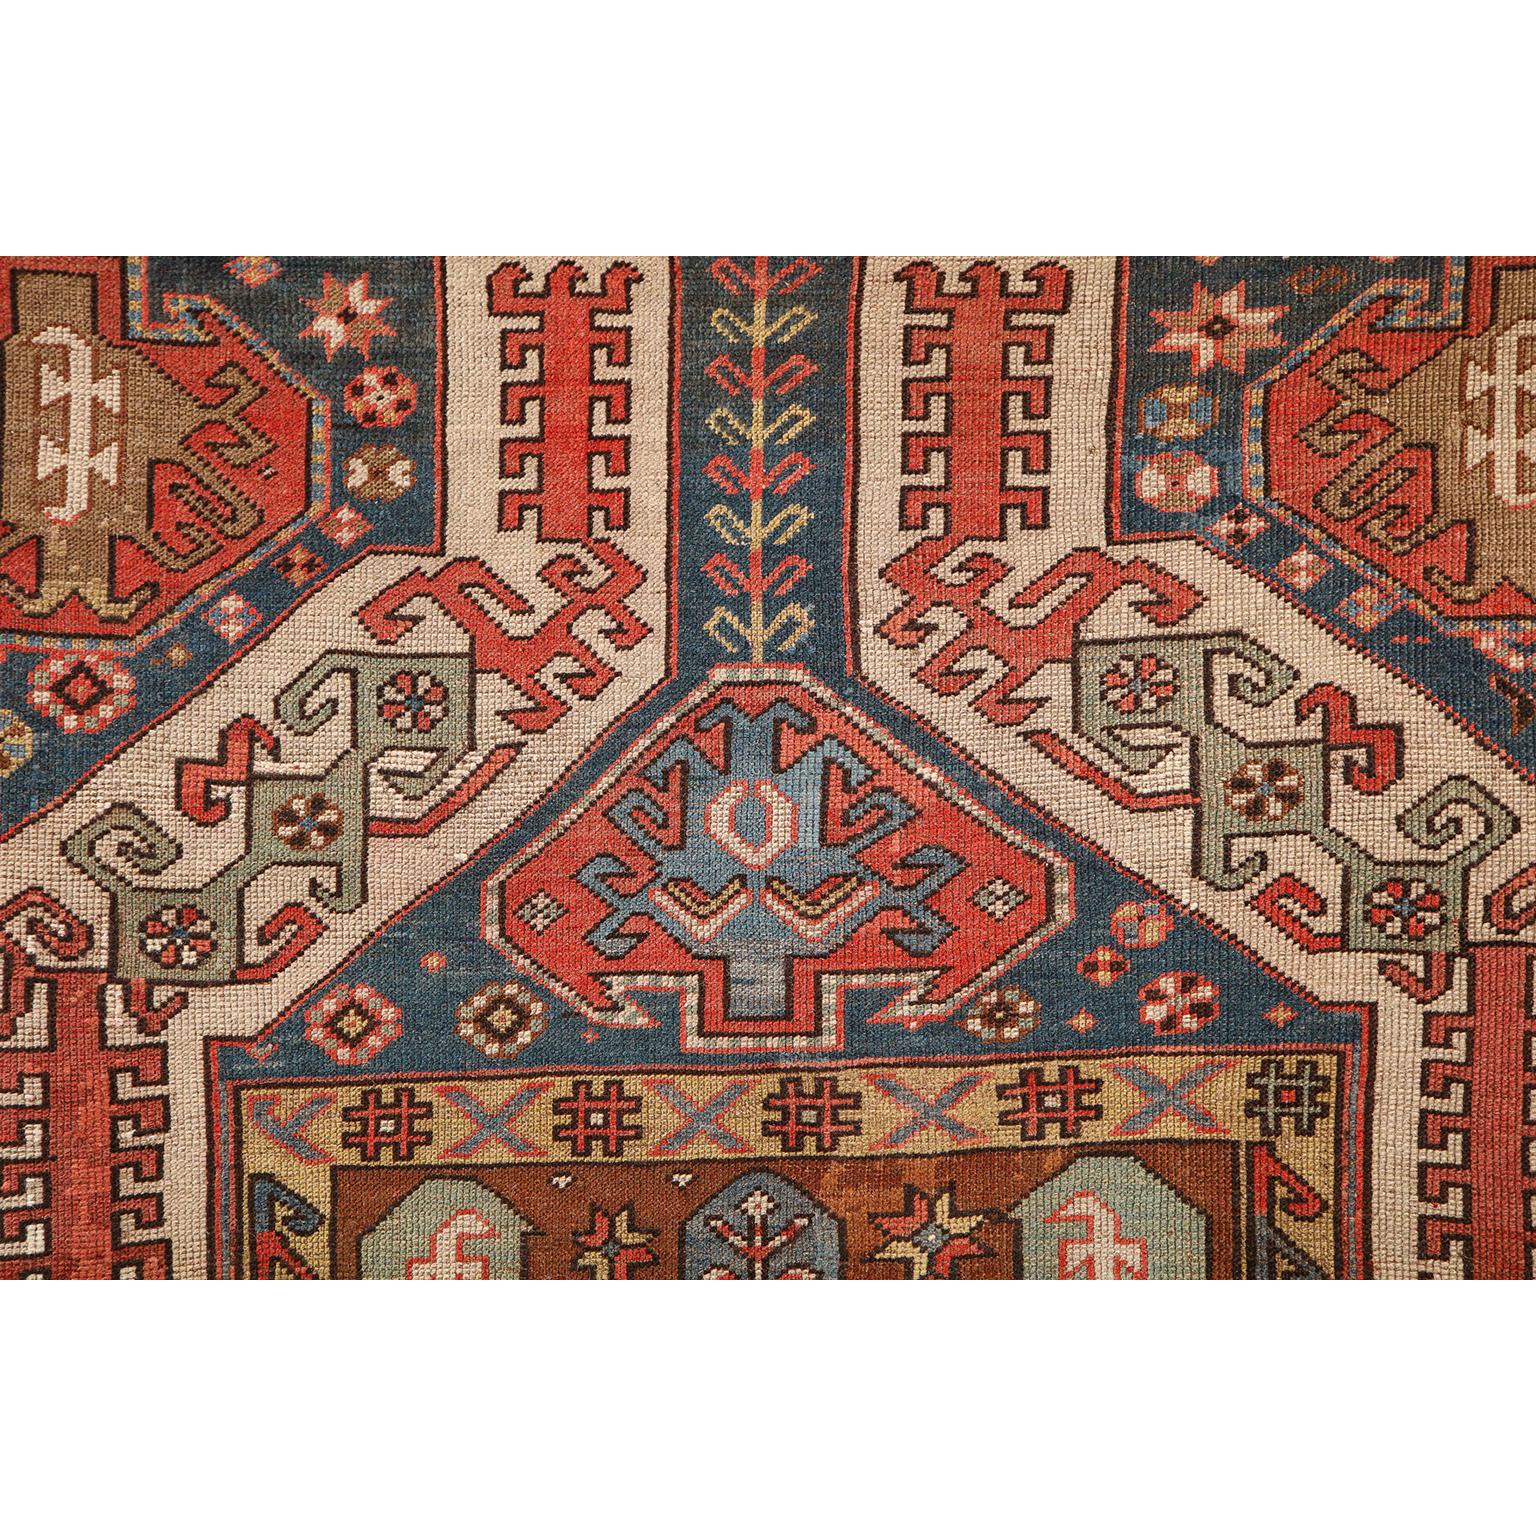 Late 19th Century Antique 1880s Caucasian Rug, Wool, Blue, Green, Red, 4' x 6' For Sale